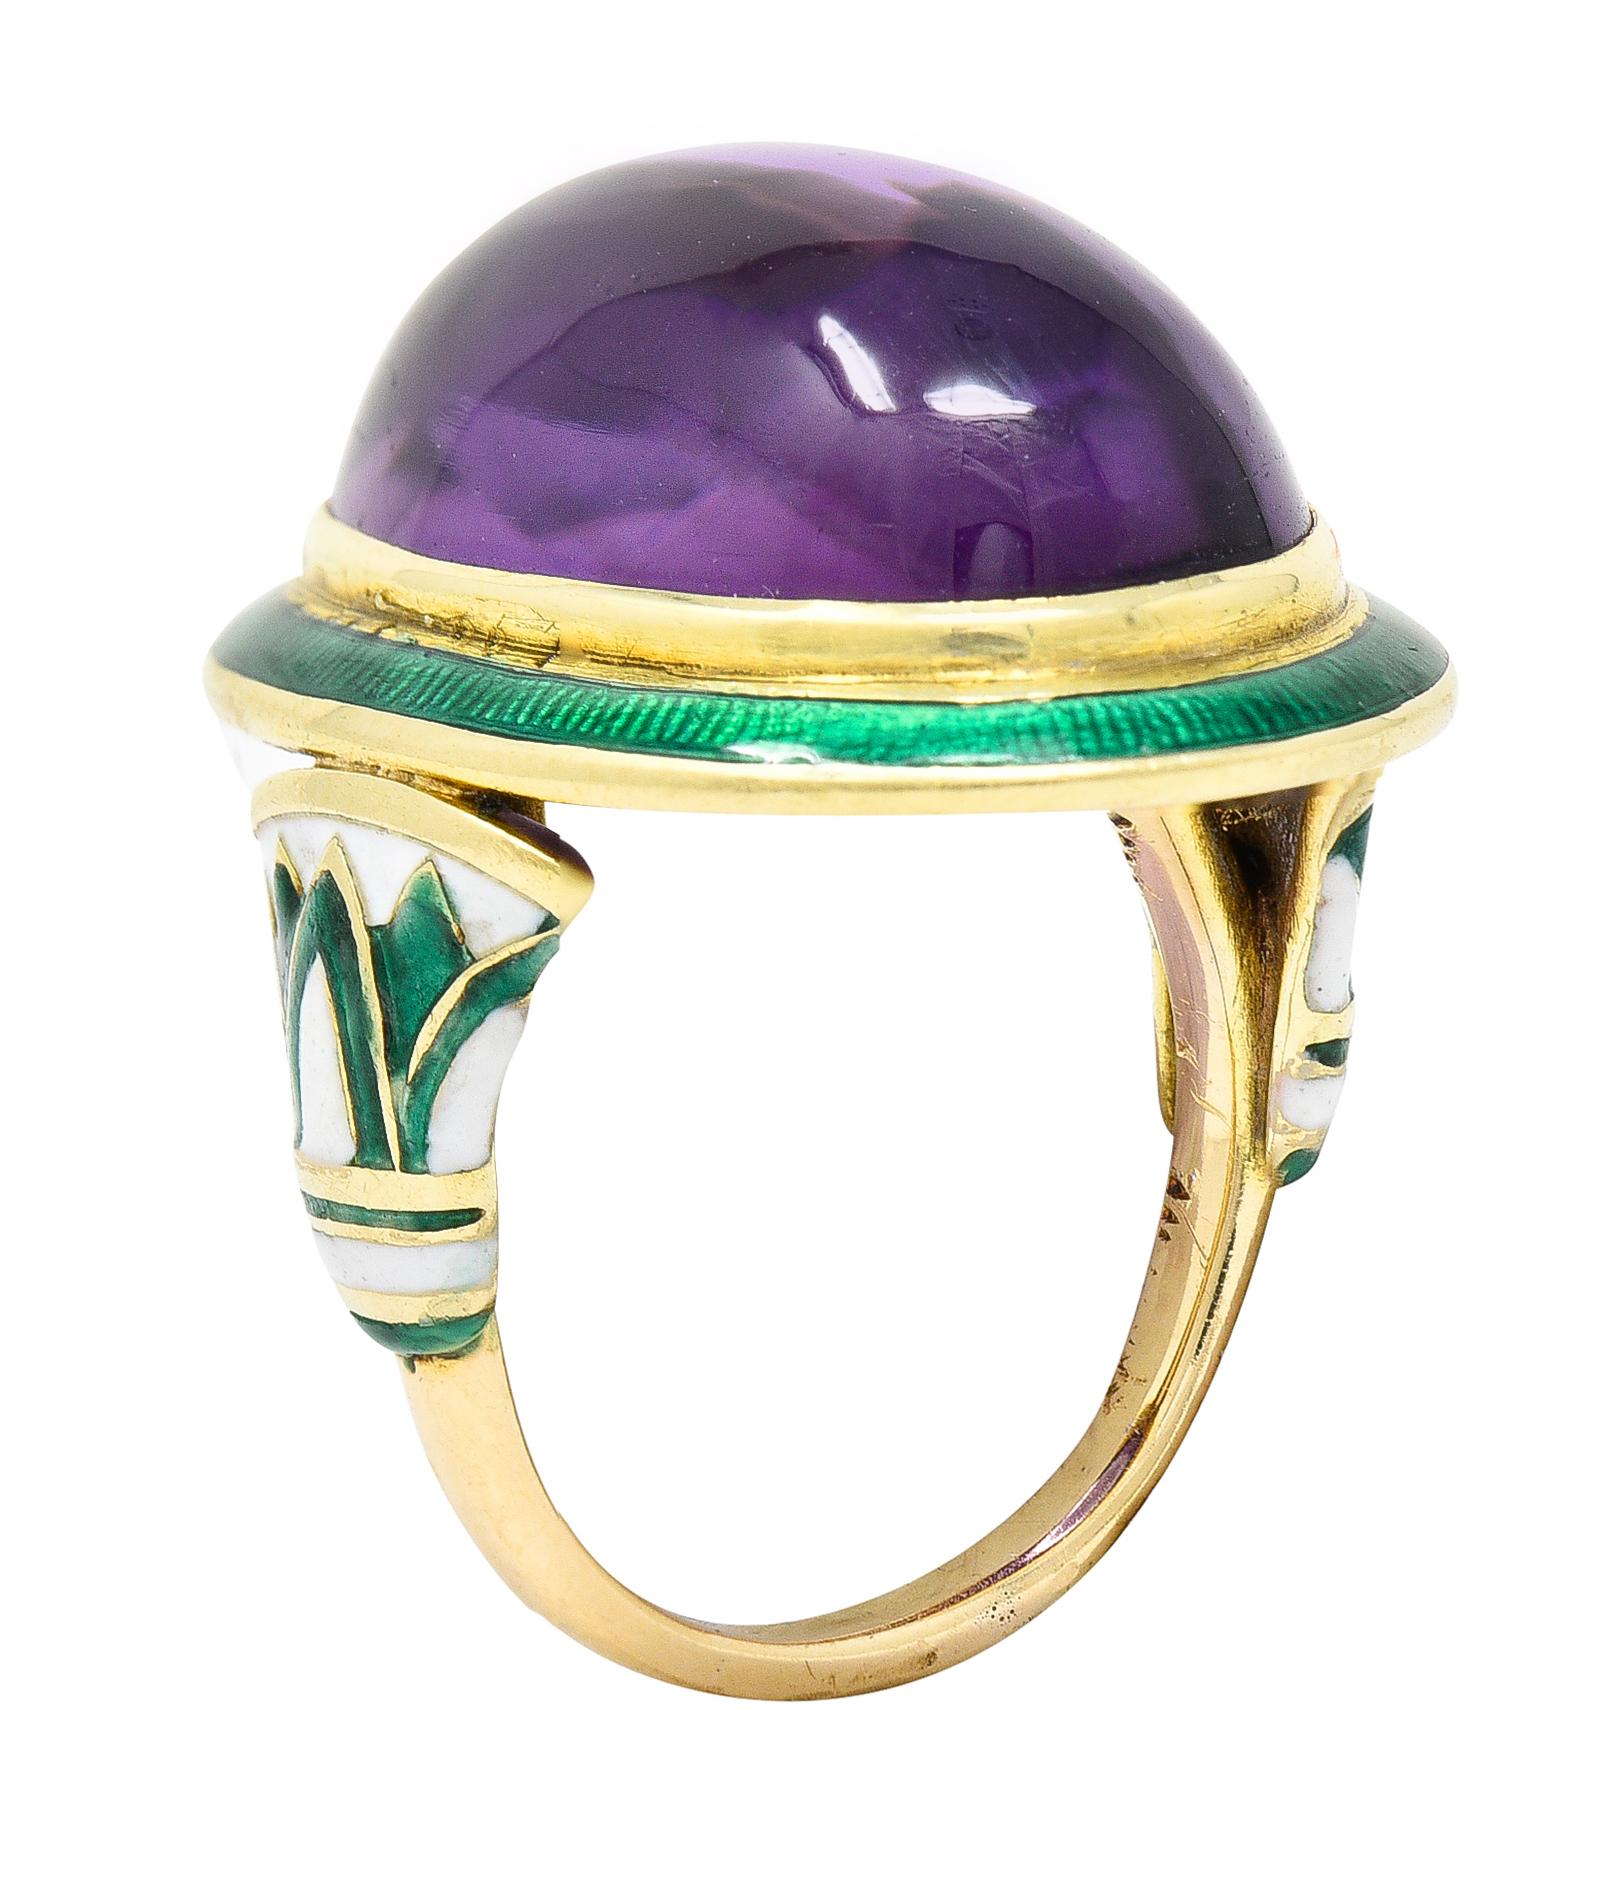 Featuring a mixed buff top amethyst cabochon measuring approximately 19.0 x 13.0 mm. Transparent with uniform pinkish purple color - medium saturation. Bezel set in gold and surrounded by a bright green guilloche enamel halo.
Shoulders are stylized